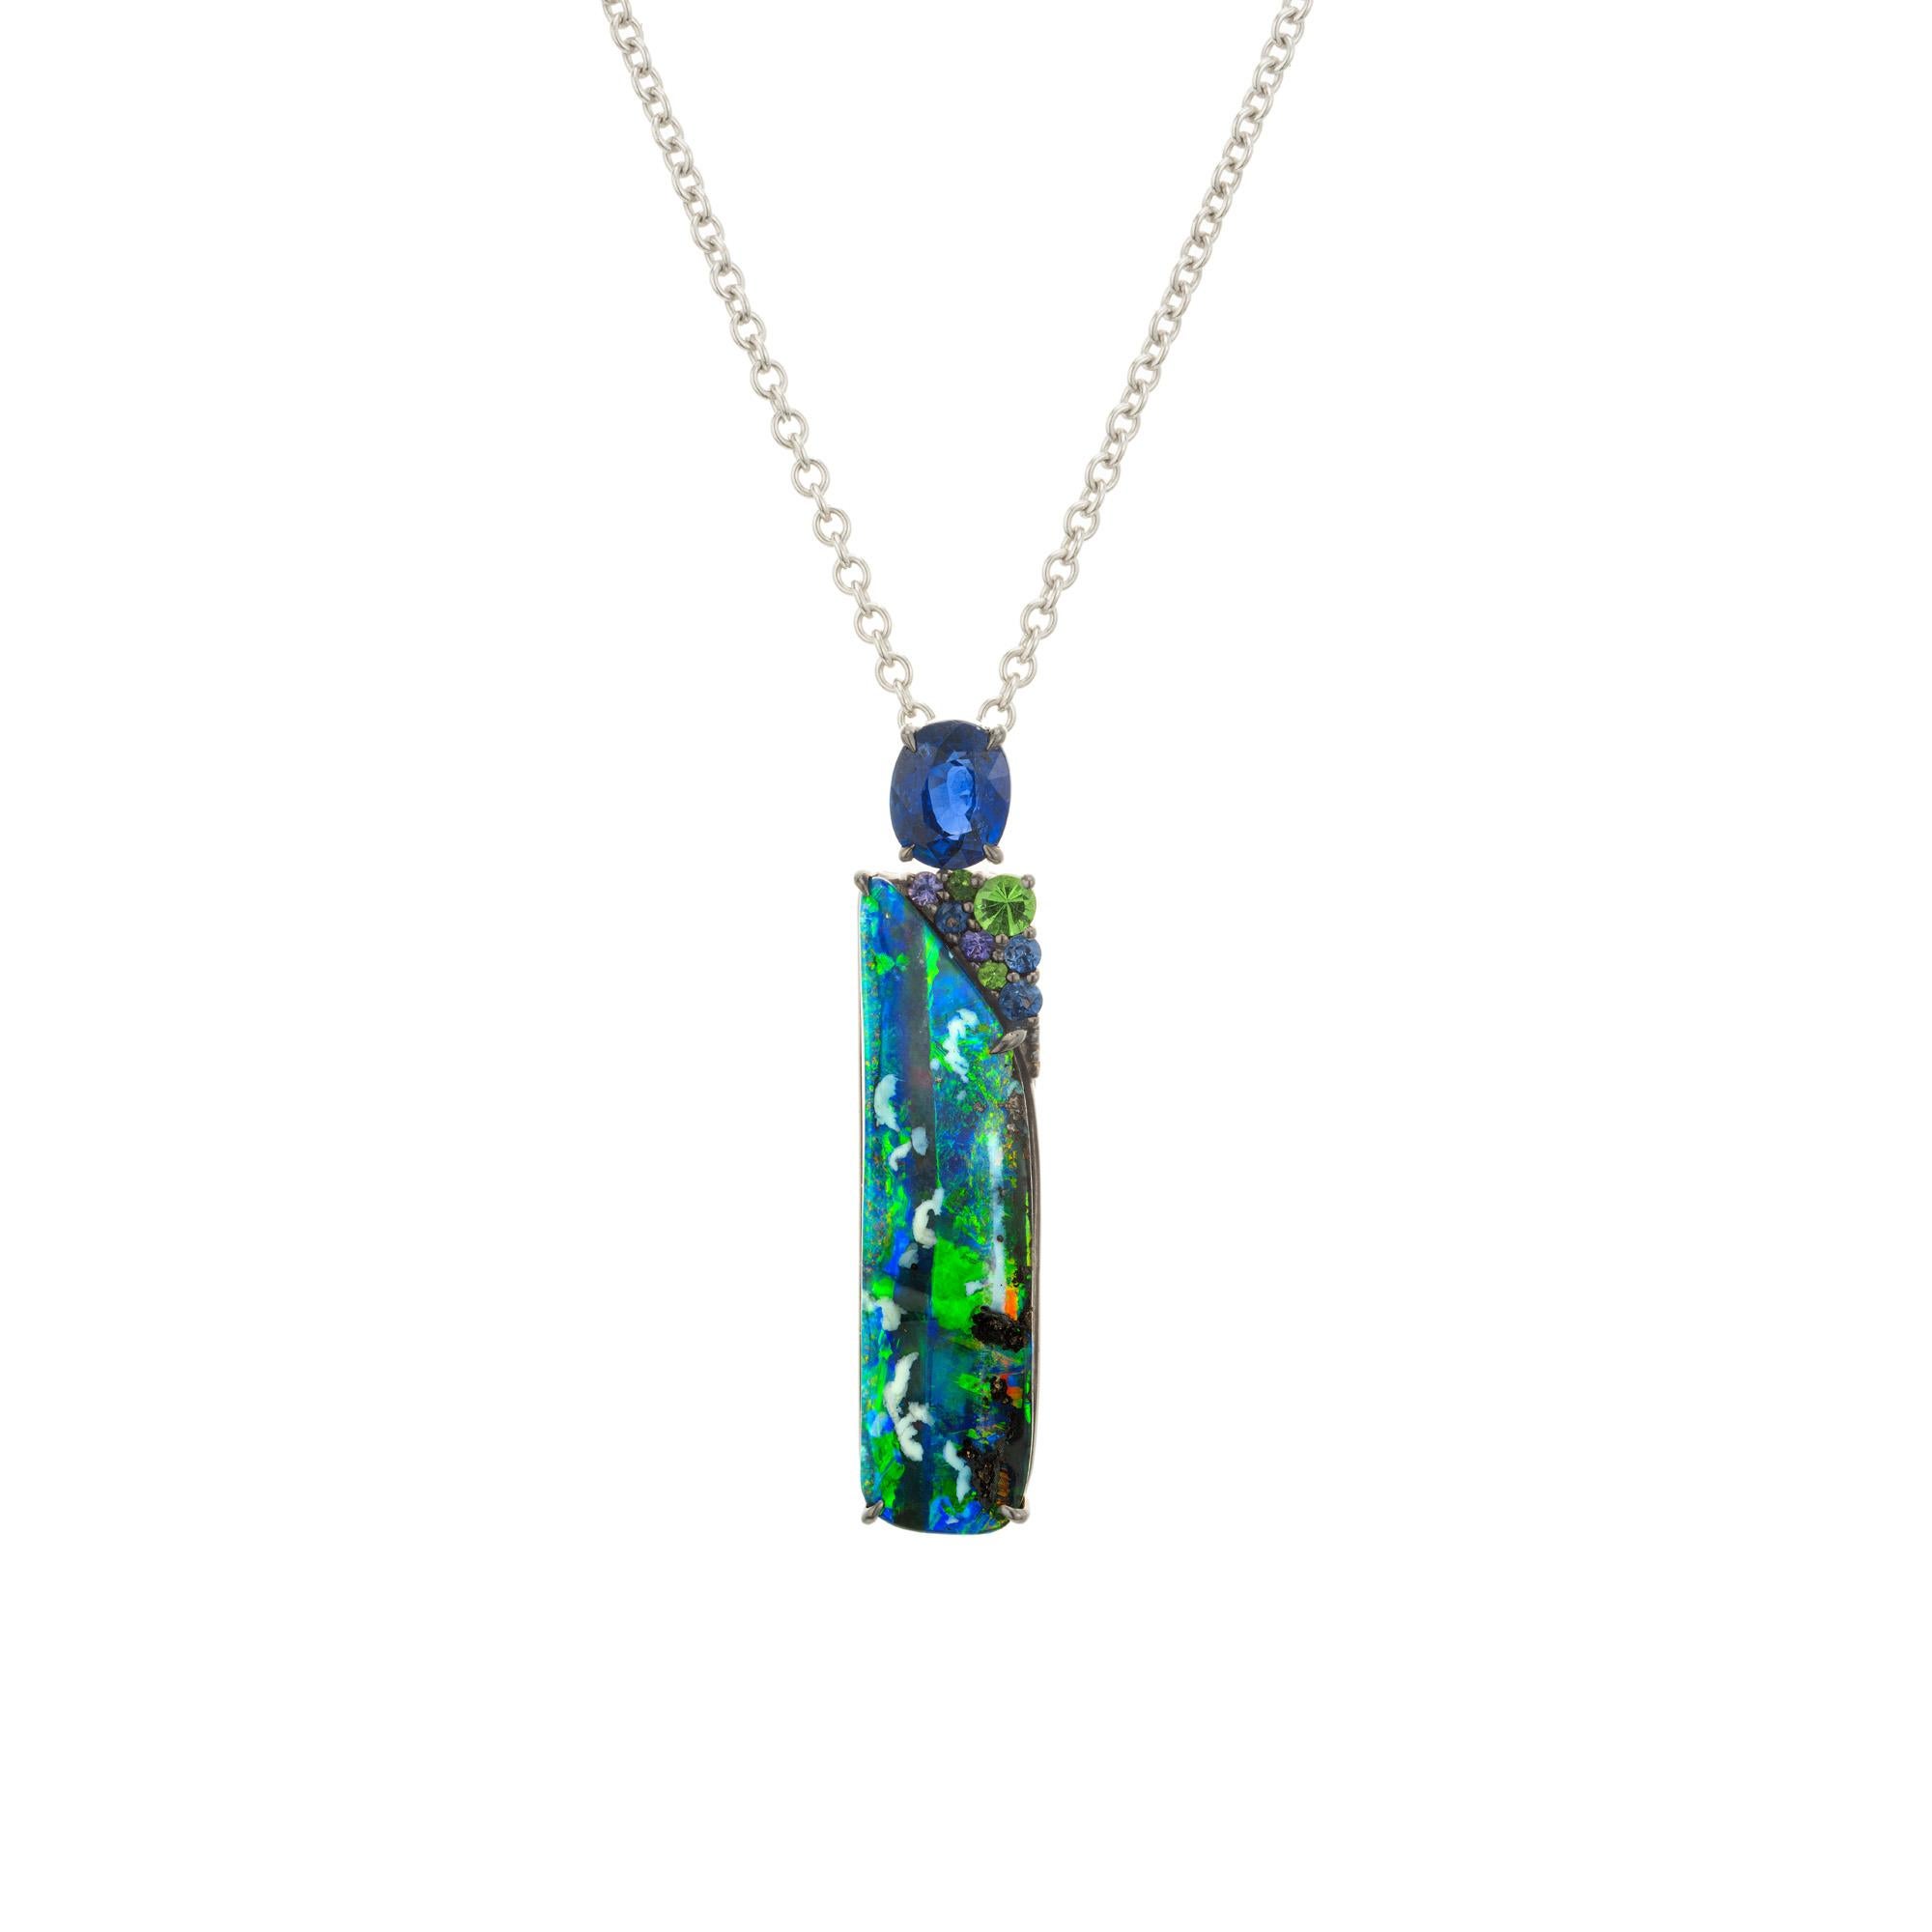 Black opal and sapphire pendant necklace. Stunning rectangular blue and green black 7.37ct opal, accented by a oval blue .87ct sapphire, 5 round blue sapphires and 3 round green garnets. The opal is more of a freeform shape with a natural, strong